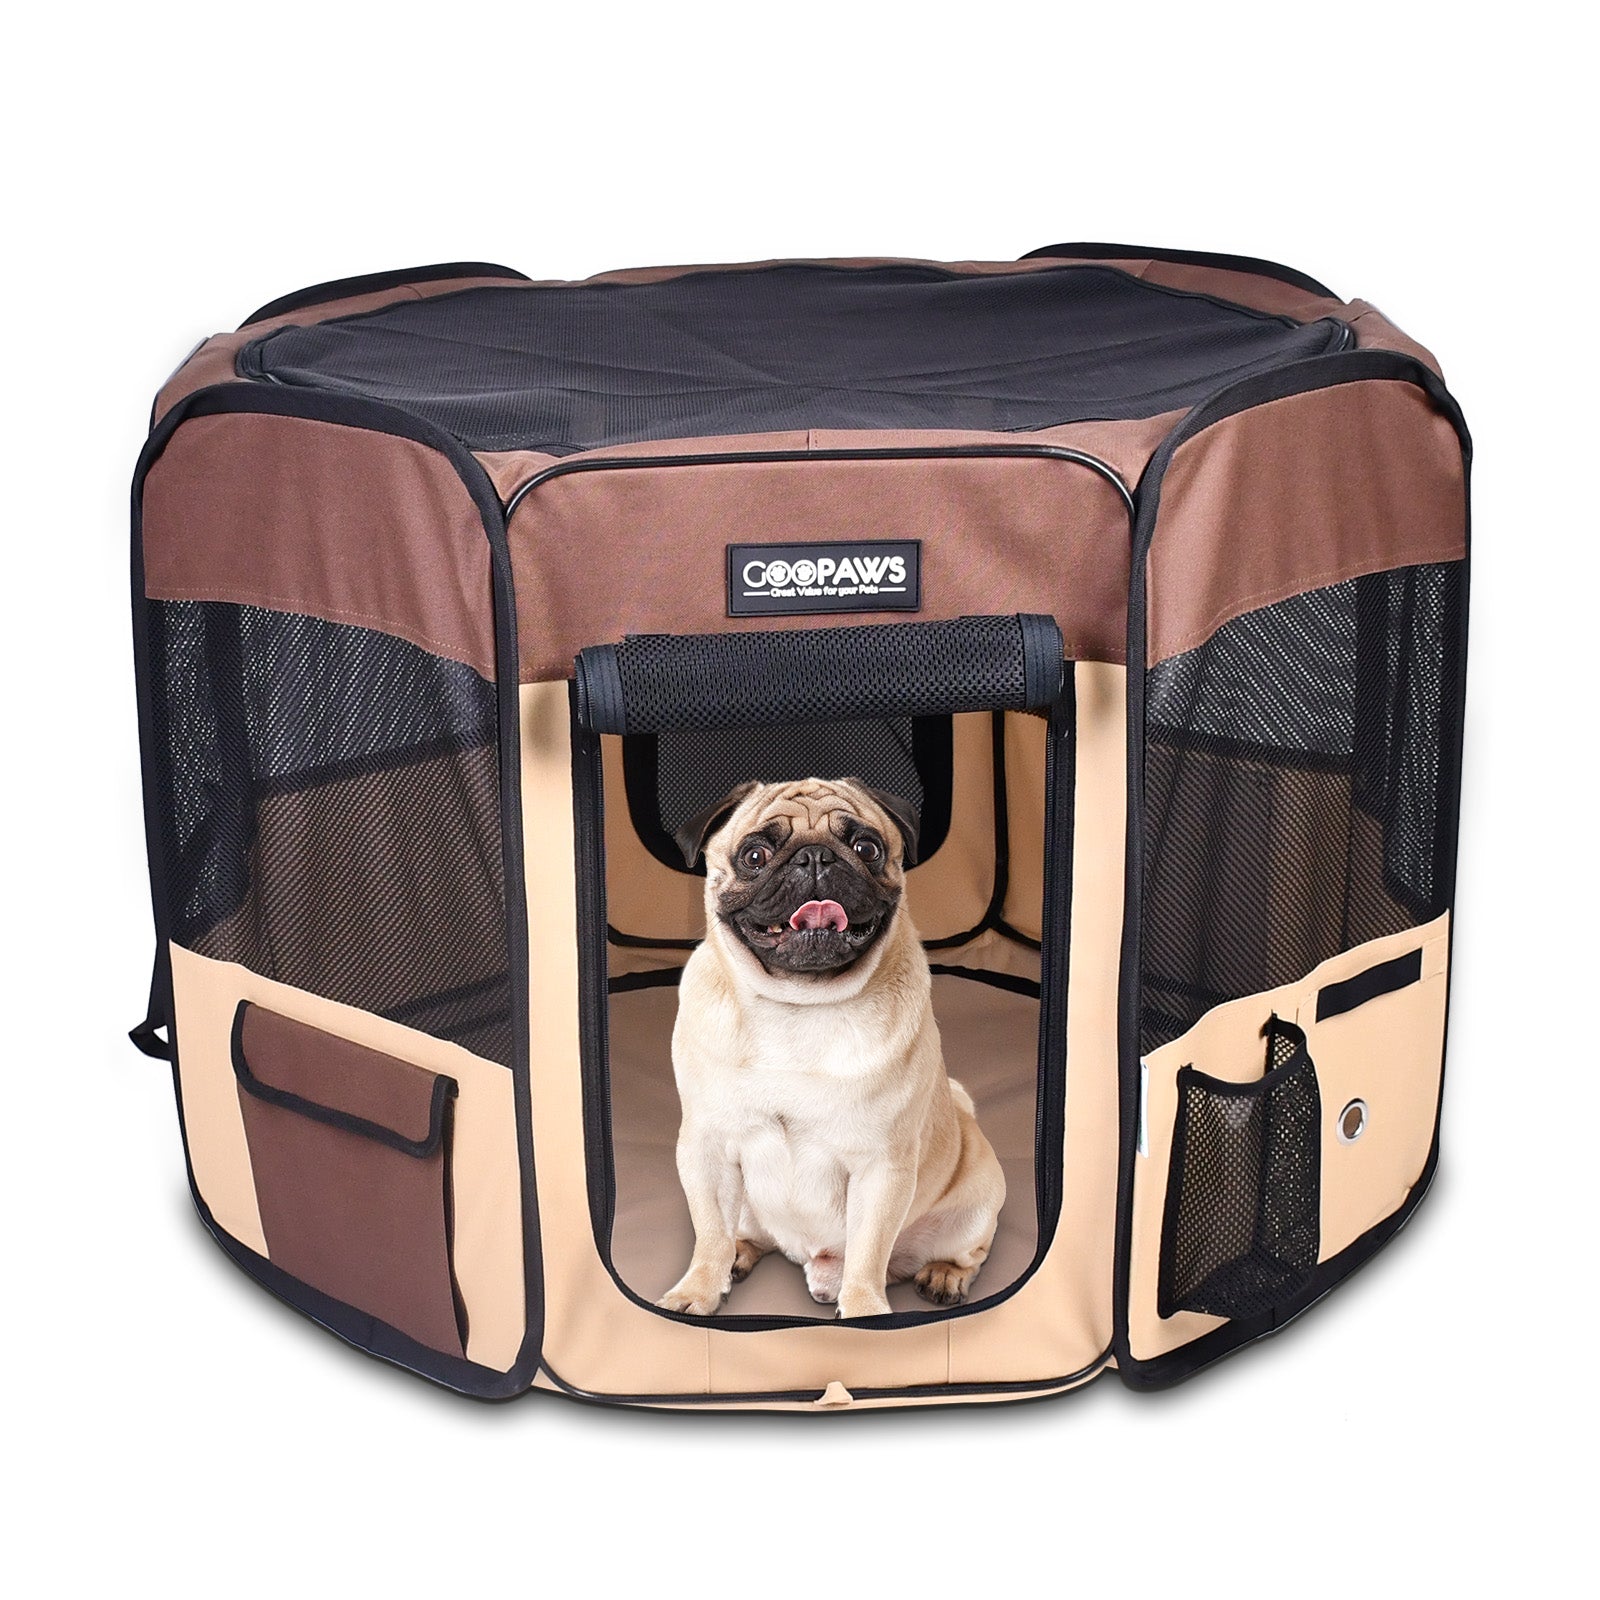 Jespet 2-Door Portable Soft-Sided Dog, Cat & Small Pet Exercise Playpen, Brown, 45''